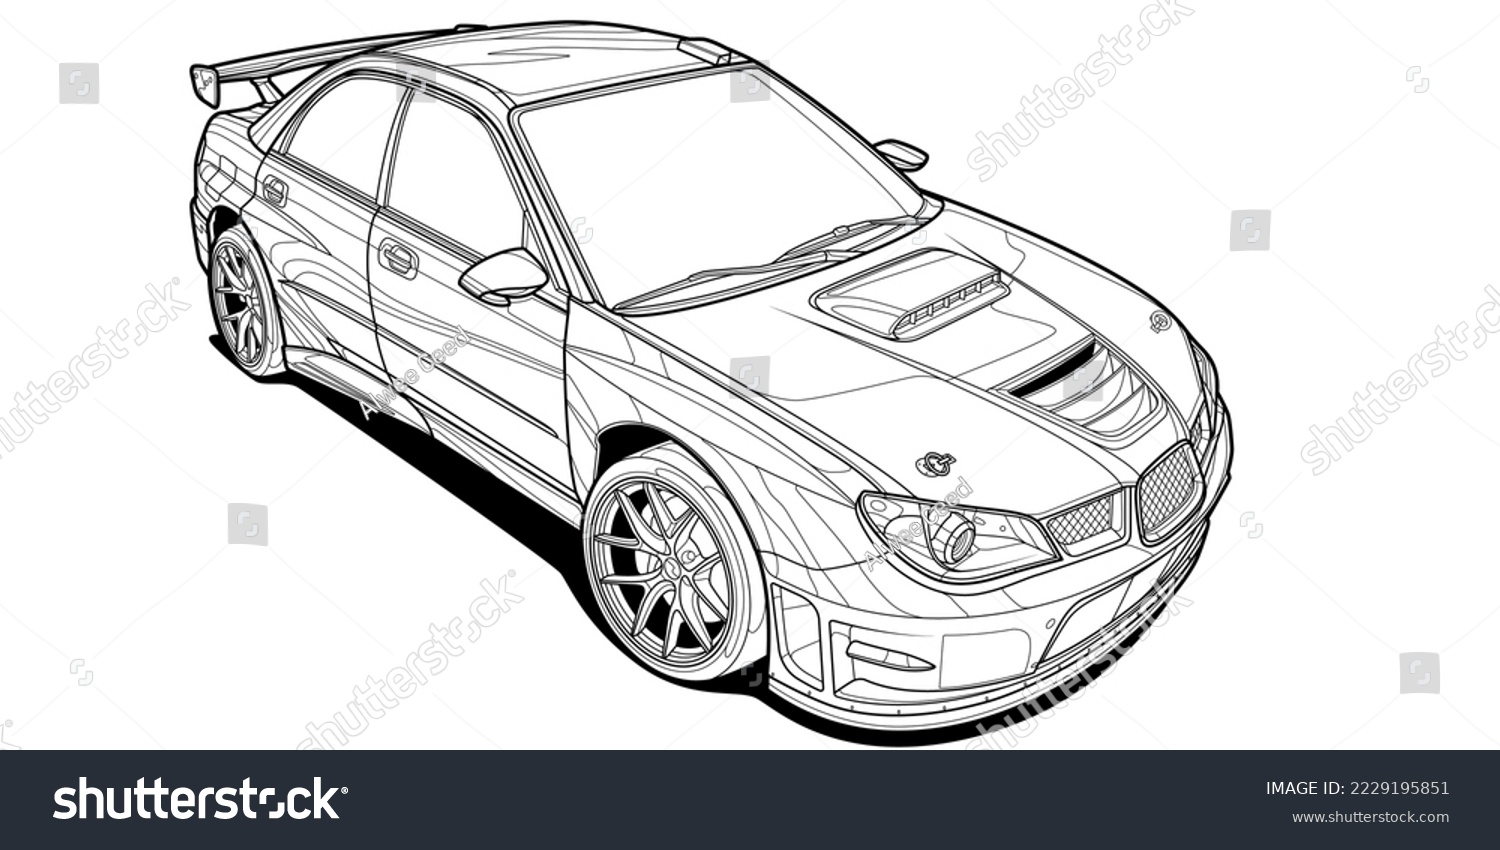 Thousand car coloring pages adults royalty